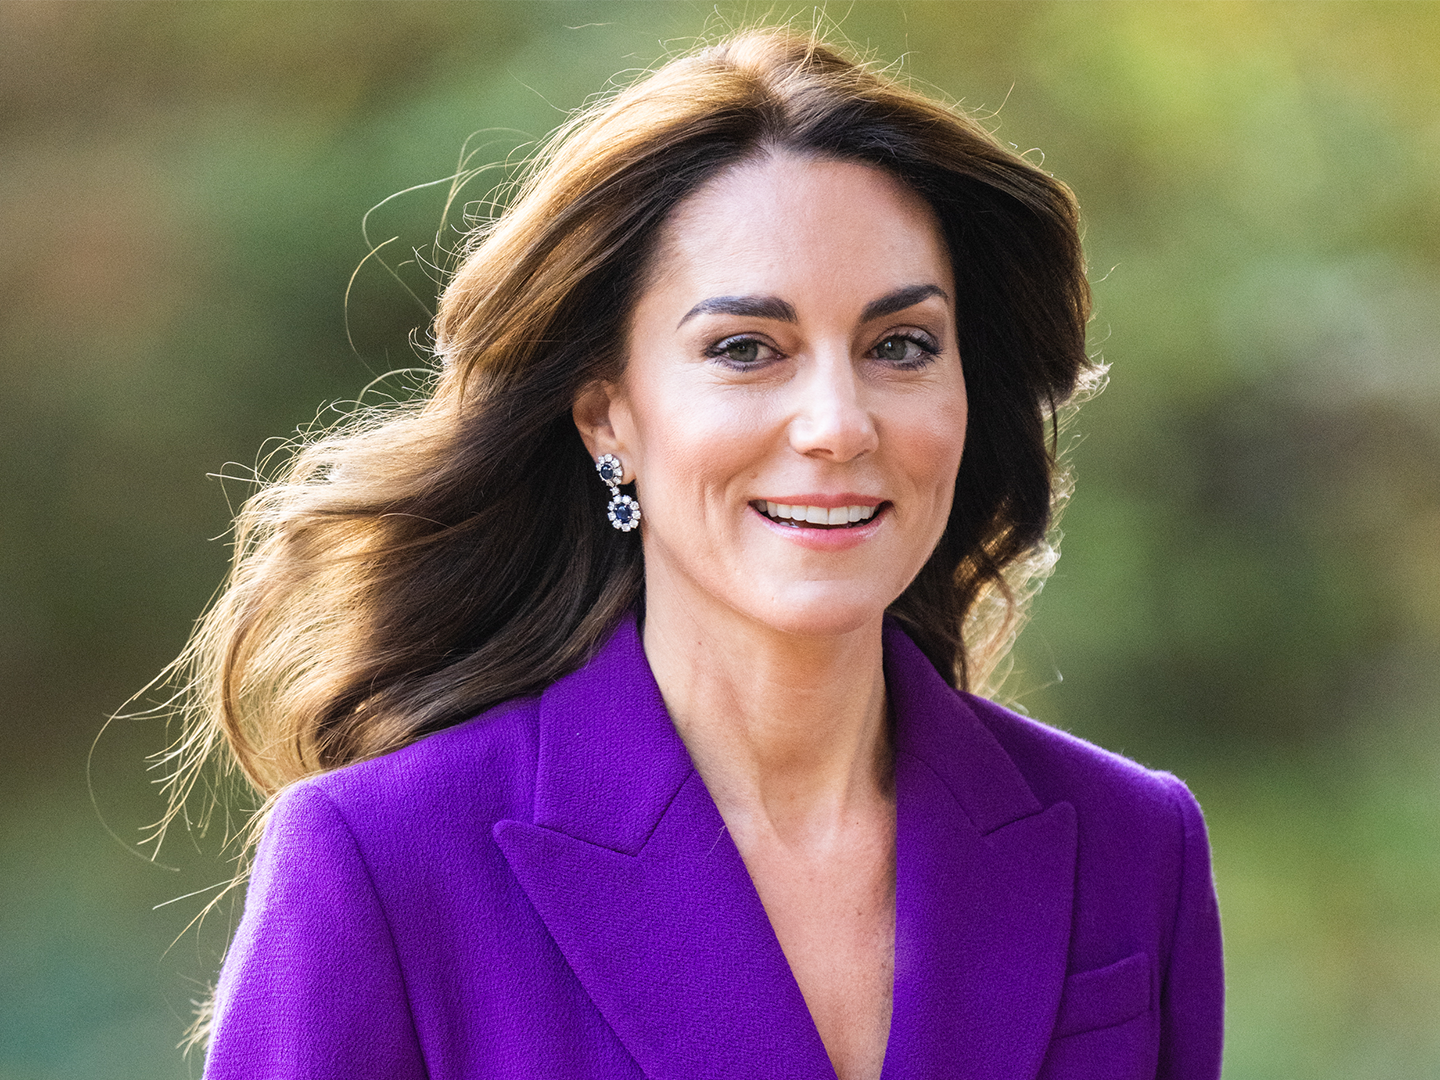 Kate Middleton Is Waiting for This Important ‘Green Light’ Before Returning to Royal Duties